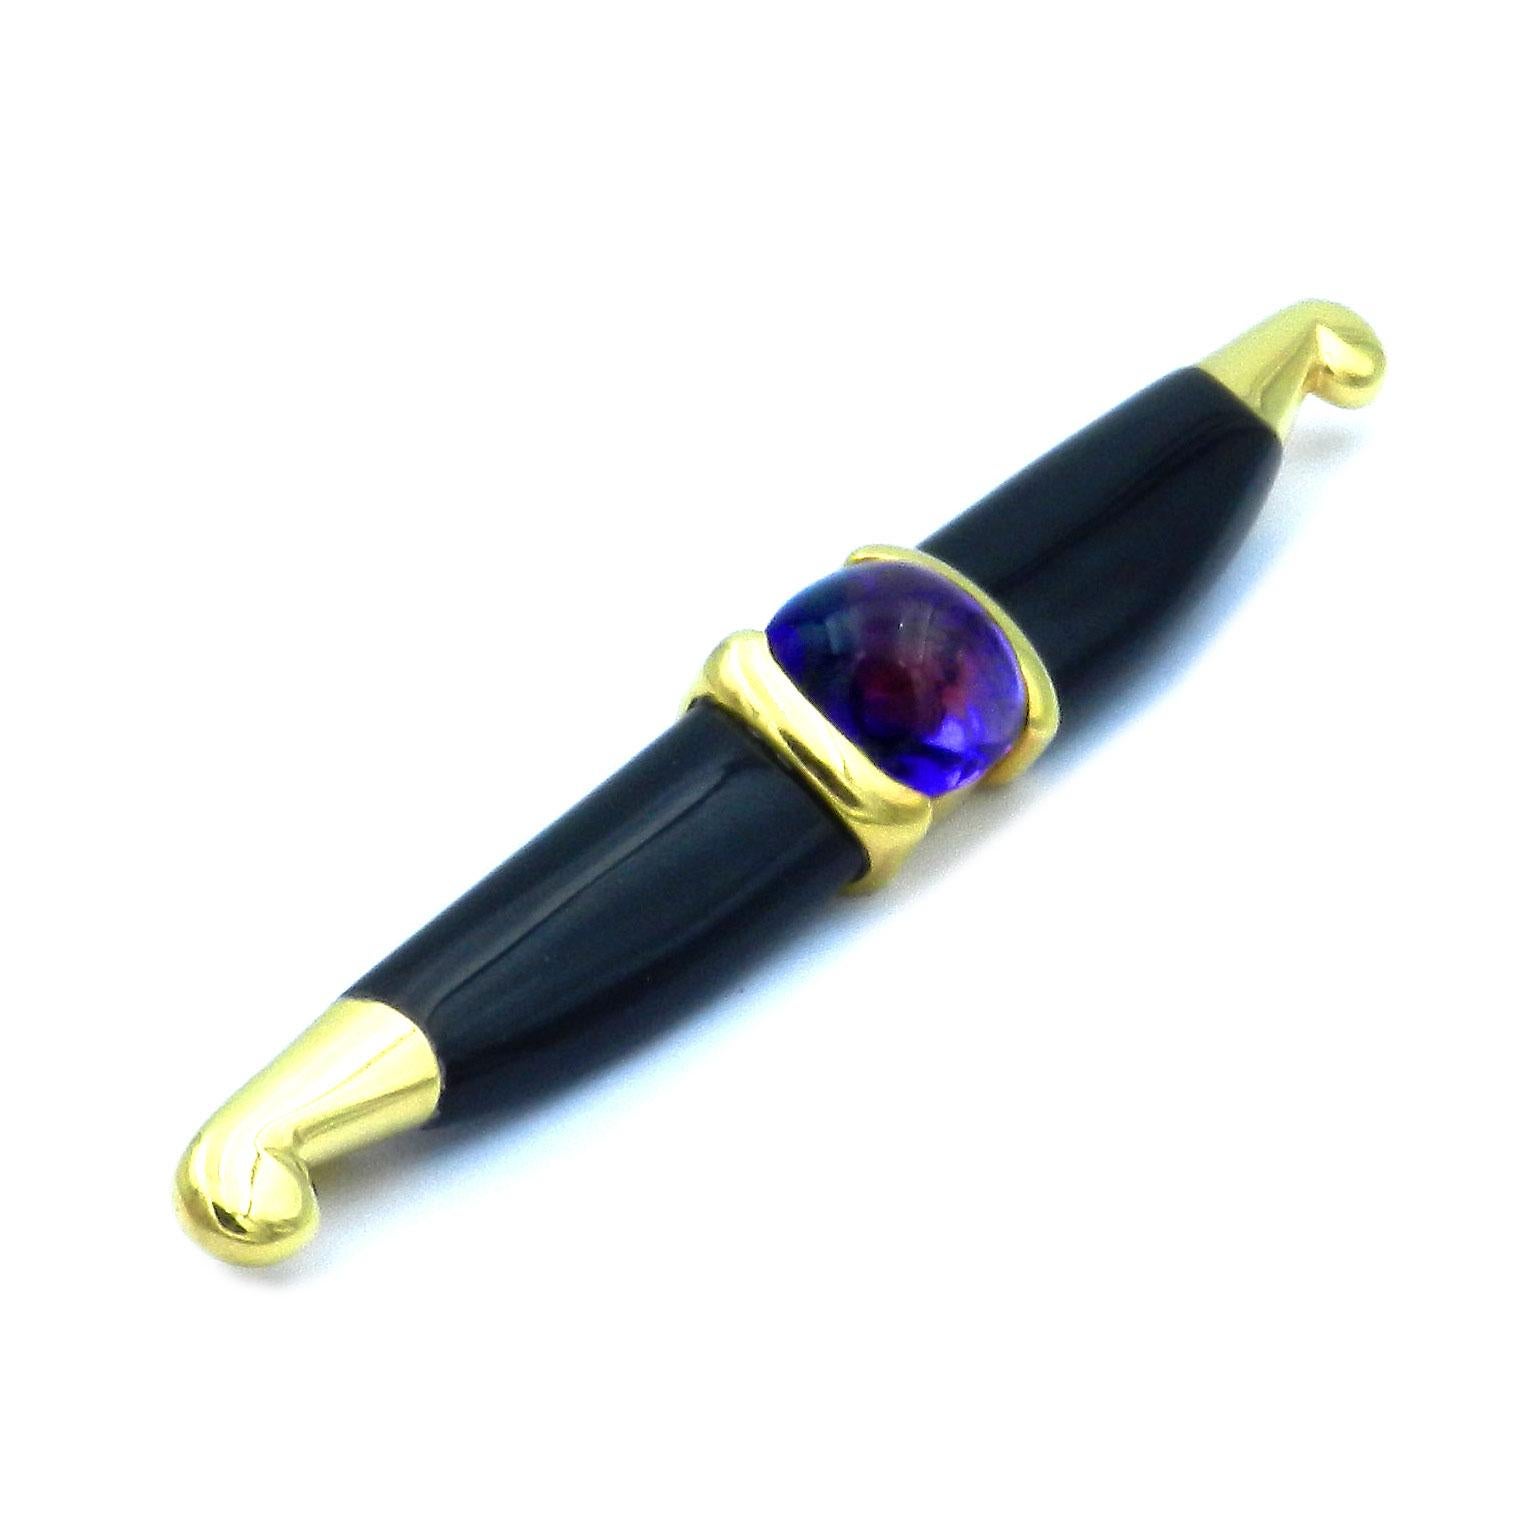 Michael Bondanza Onyx Amethyst 18K Gold Bar Brooch circa 1980

Extravagant Michael Bondanza designer brooch made of yellow gold in the shape of a stylized buffalo horn, centrally set with a violet sugarloaf amethyst cabochon, flanked by two deep